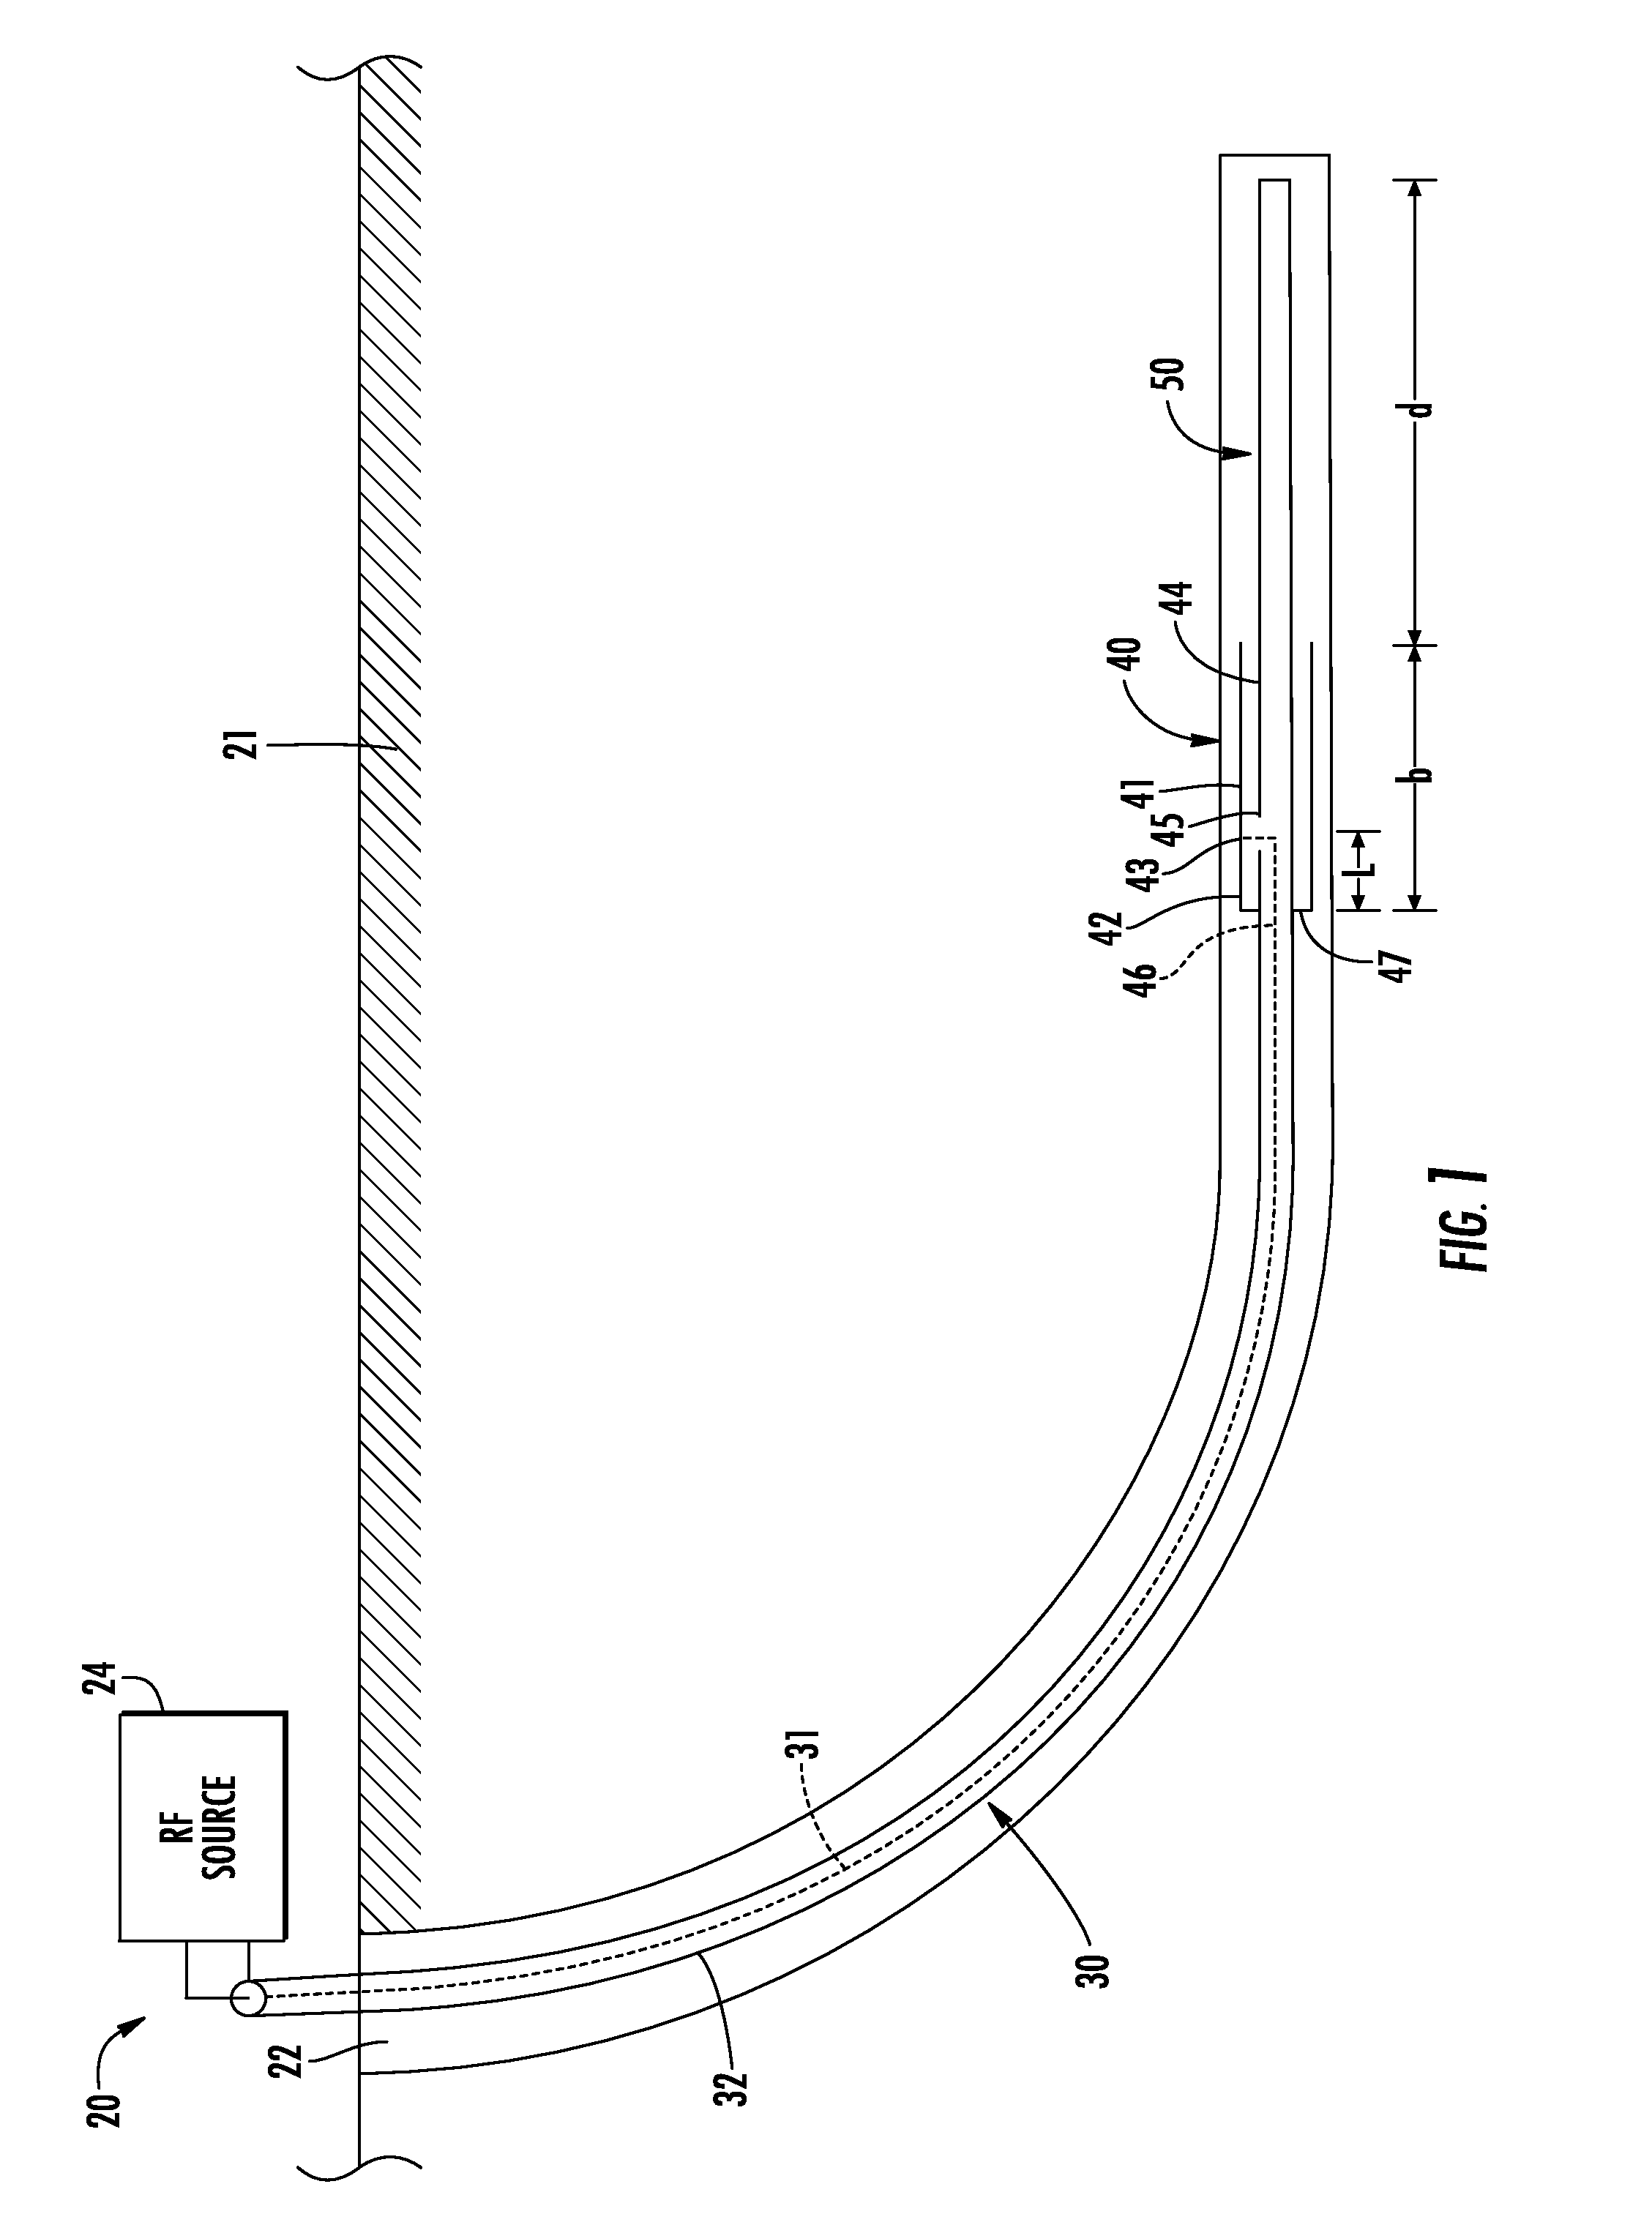 Hydrocarbon resource heating system including balun having a ferrite body and related methods